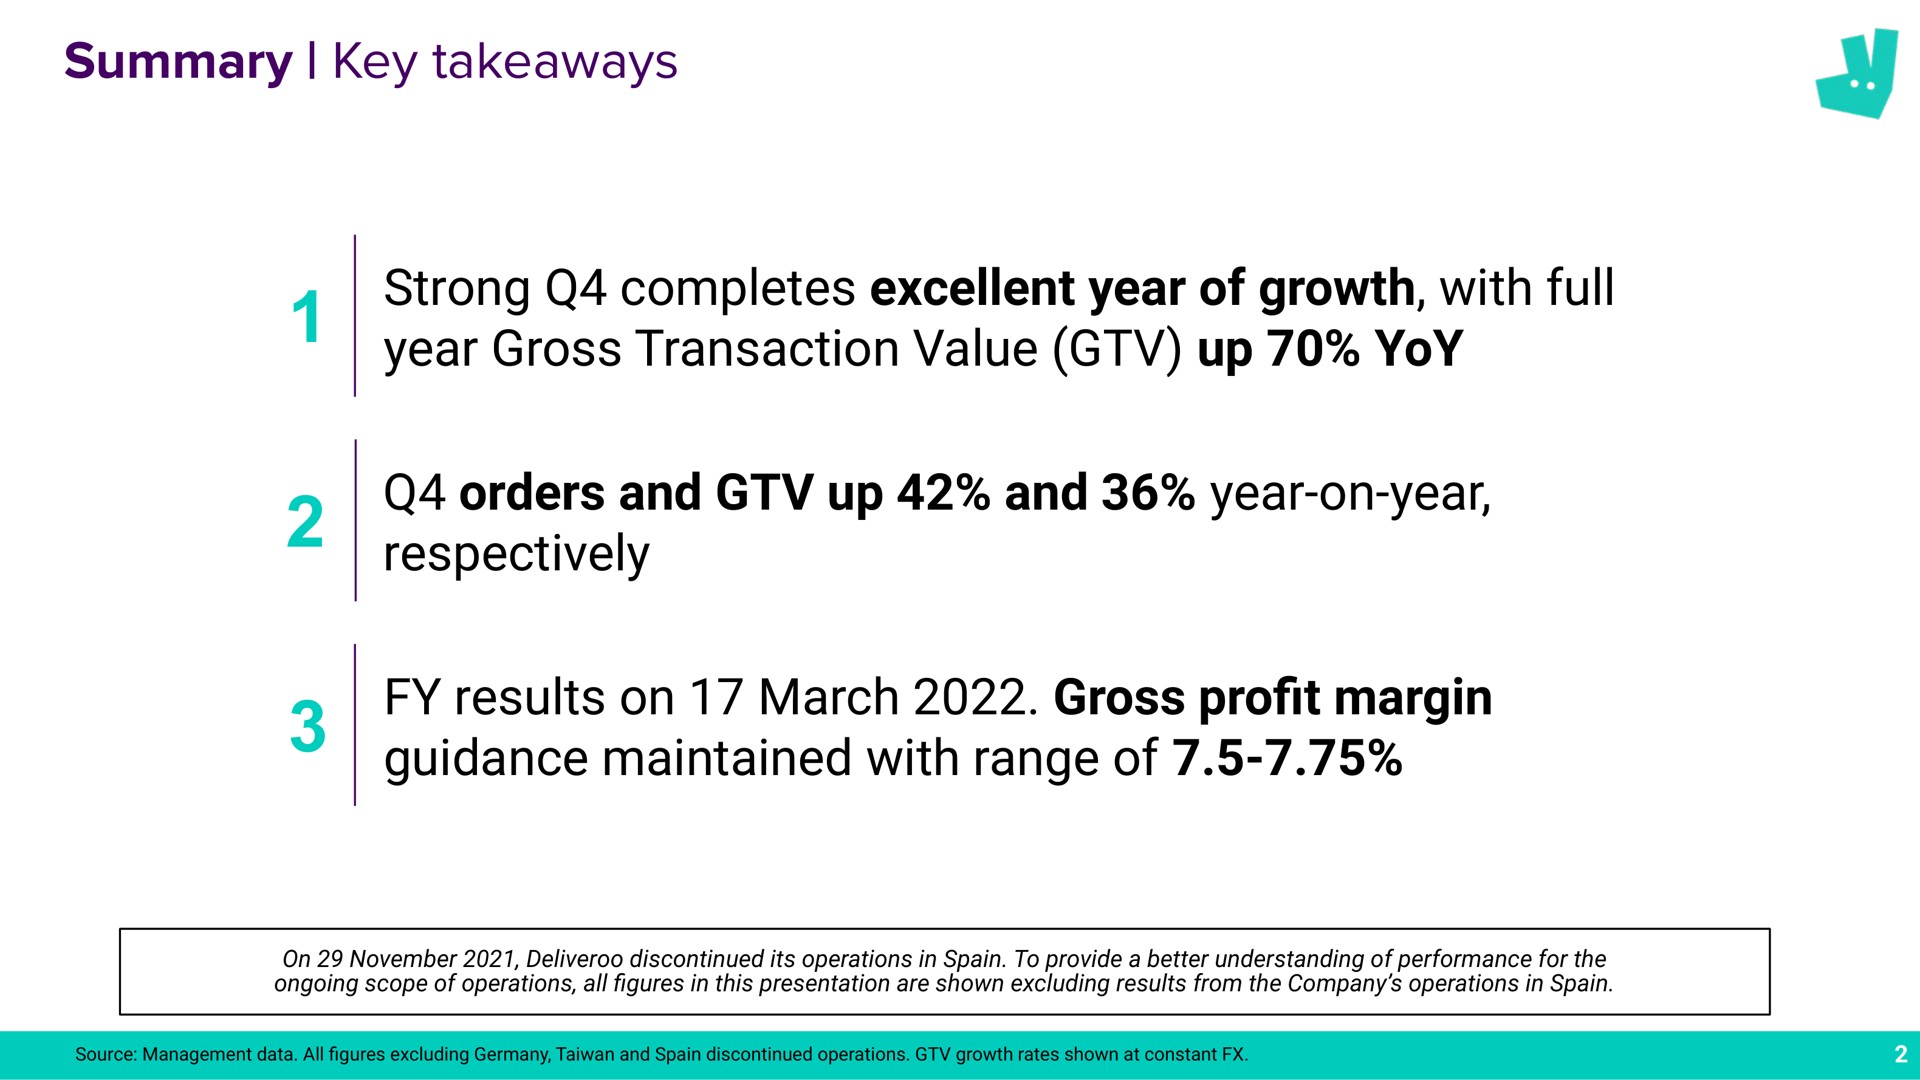 summary key strong completes excellent year of growth with full year gross transaction value up yoy orders and up and year on year respectively results on march gross pro margin guidance maintained with range of a profit | Deliveroo